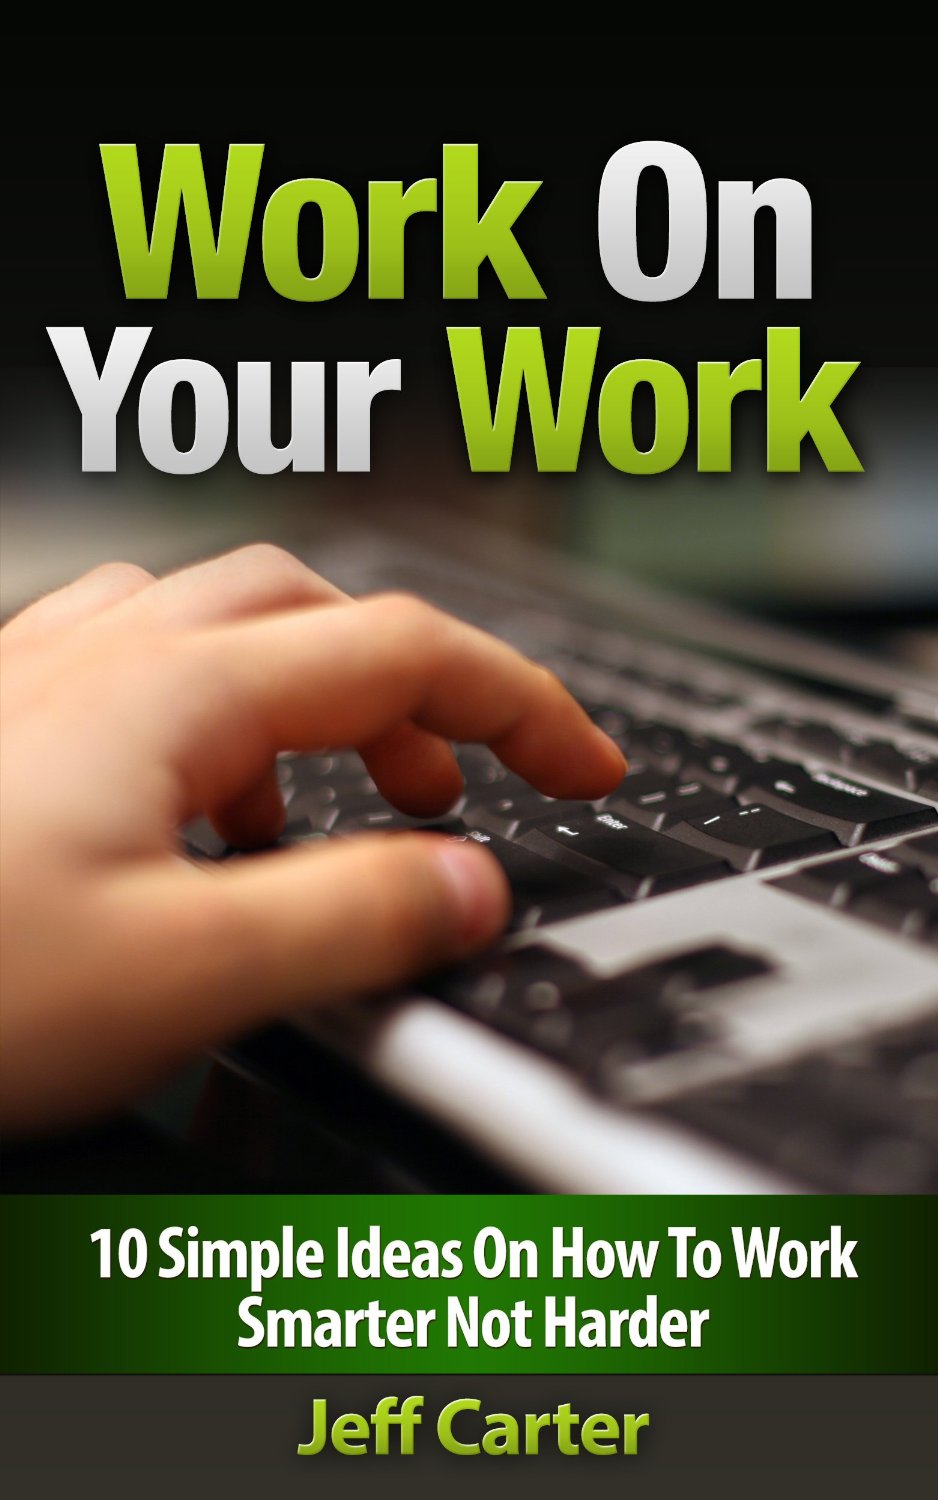 Work On Your Work – 10 Simple Ideas On How To Work Smarter Not Harder by Jeff Carter